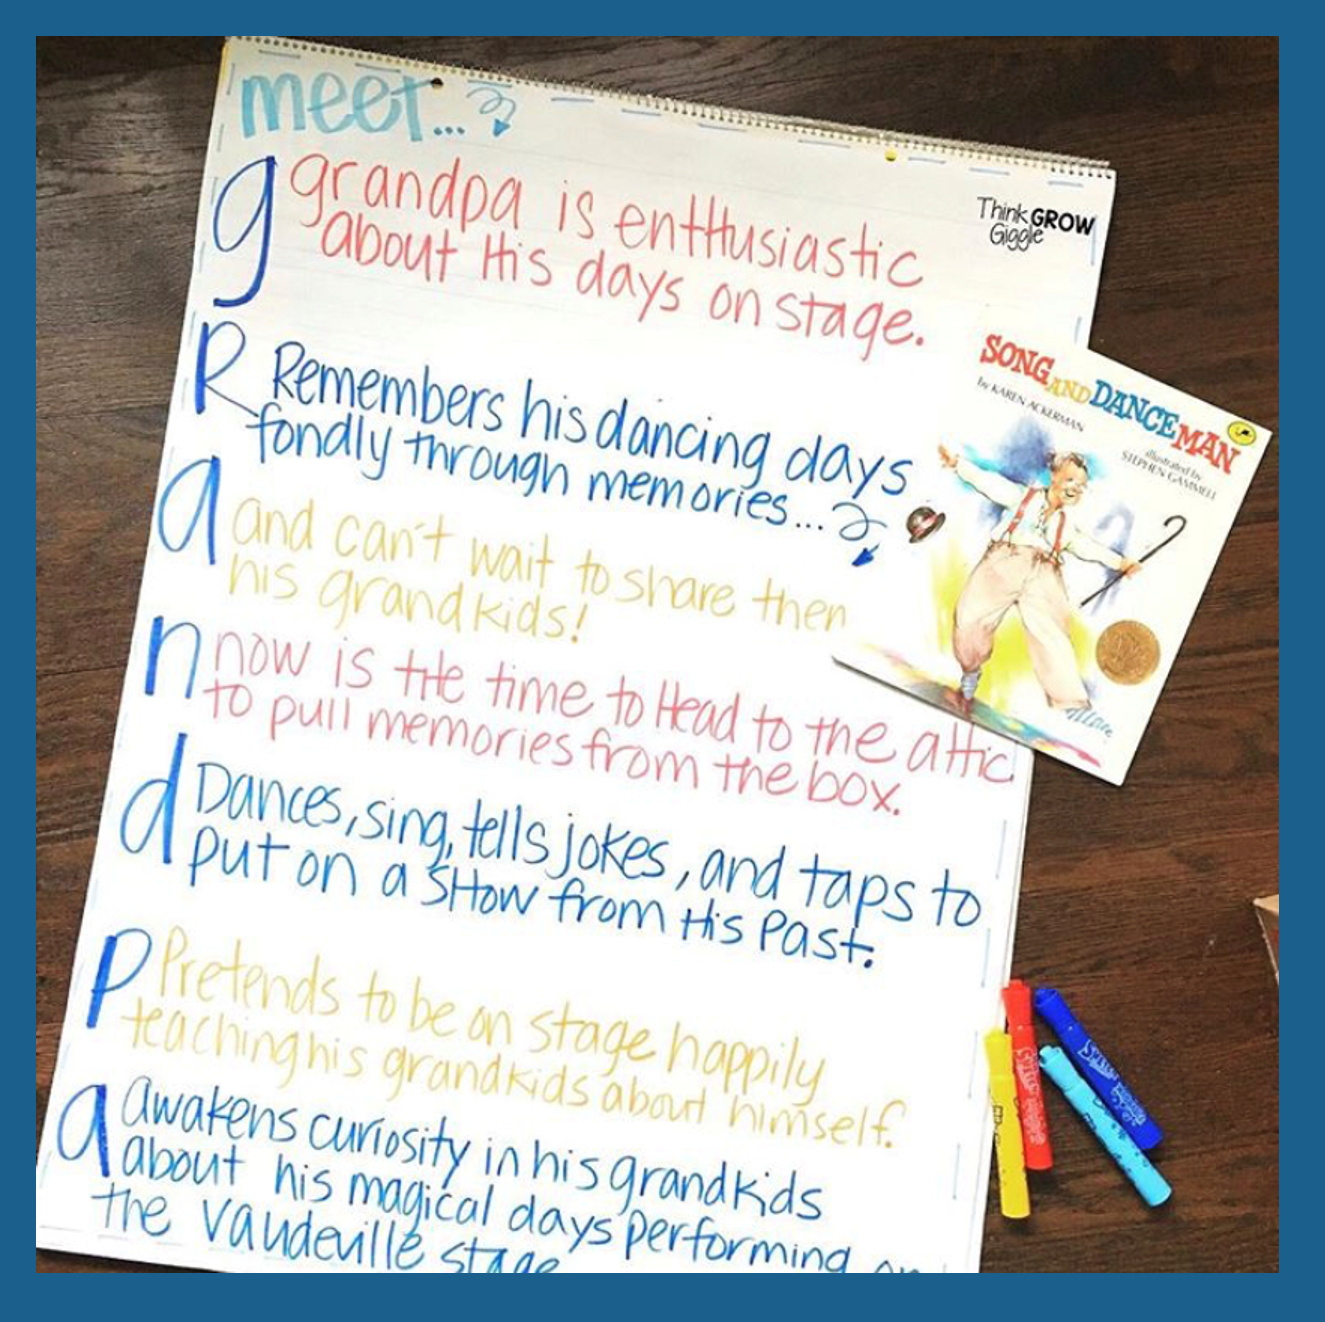 27 Acrostic Poem Ideas to Challenge Upper Elementary Students